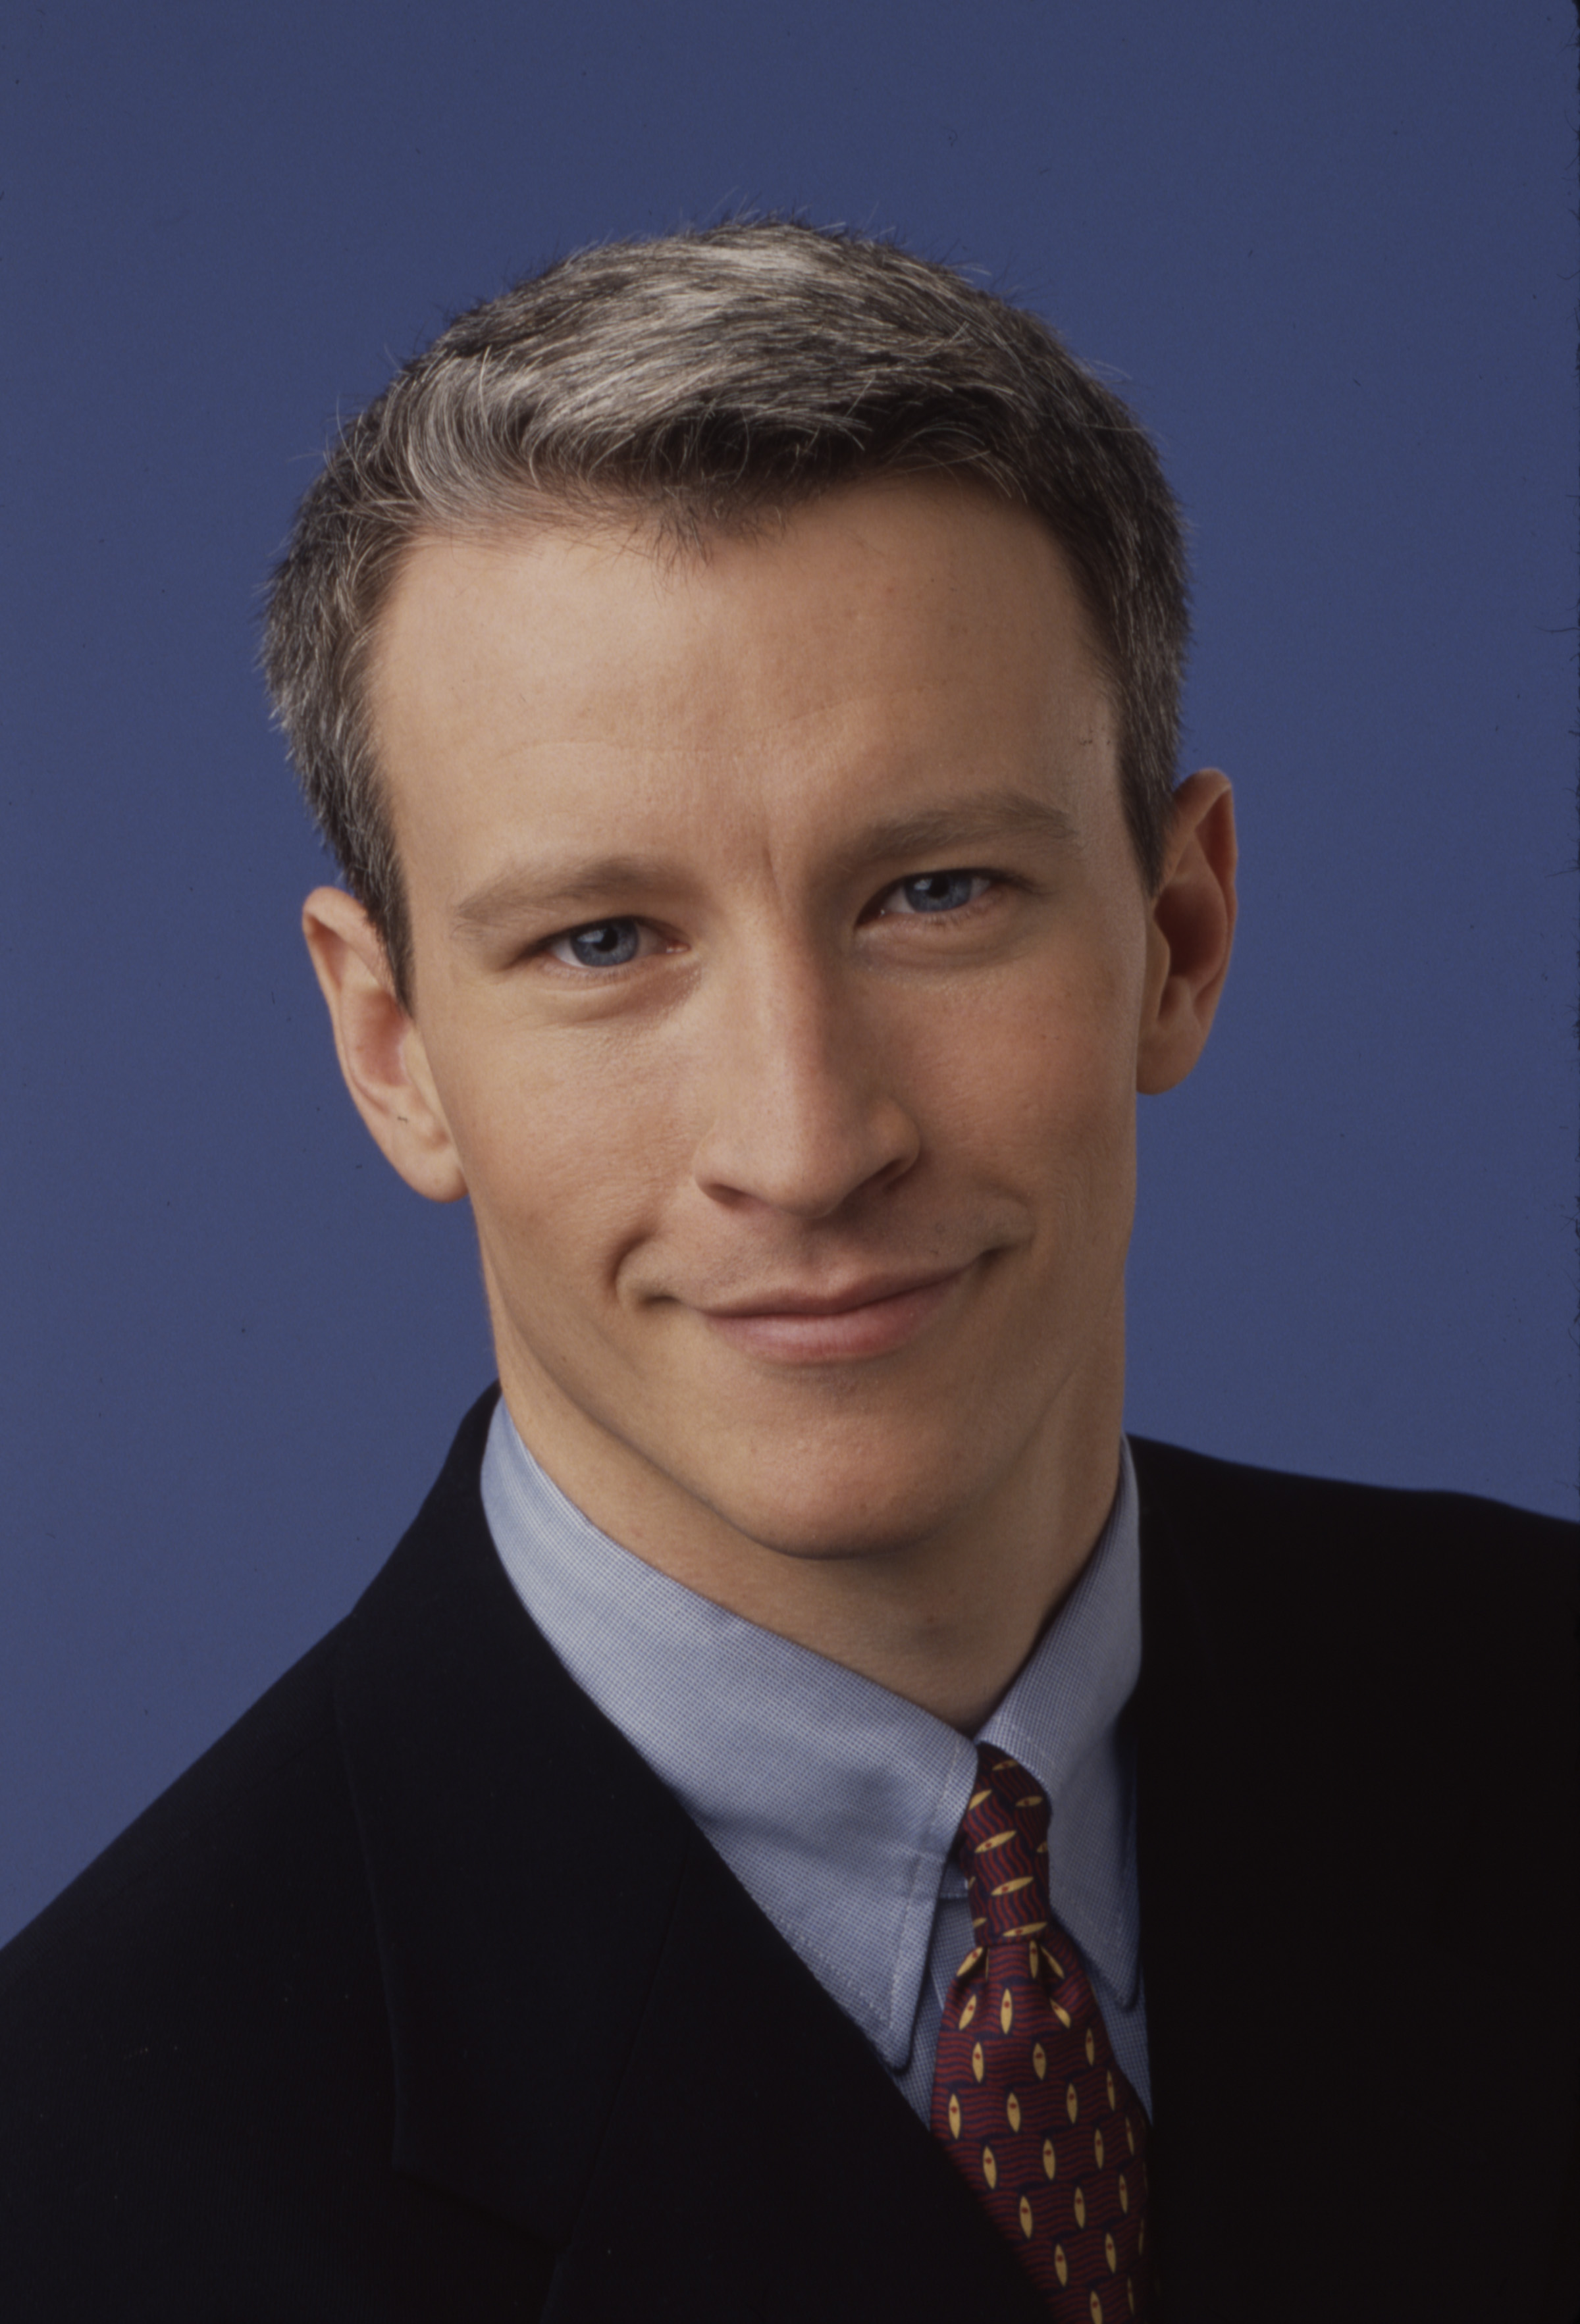 Anderson Cooper in 1995. | Source: Getty Images